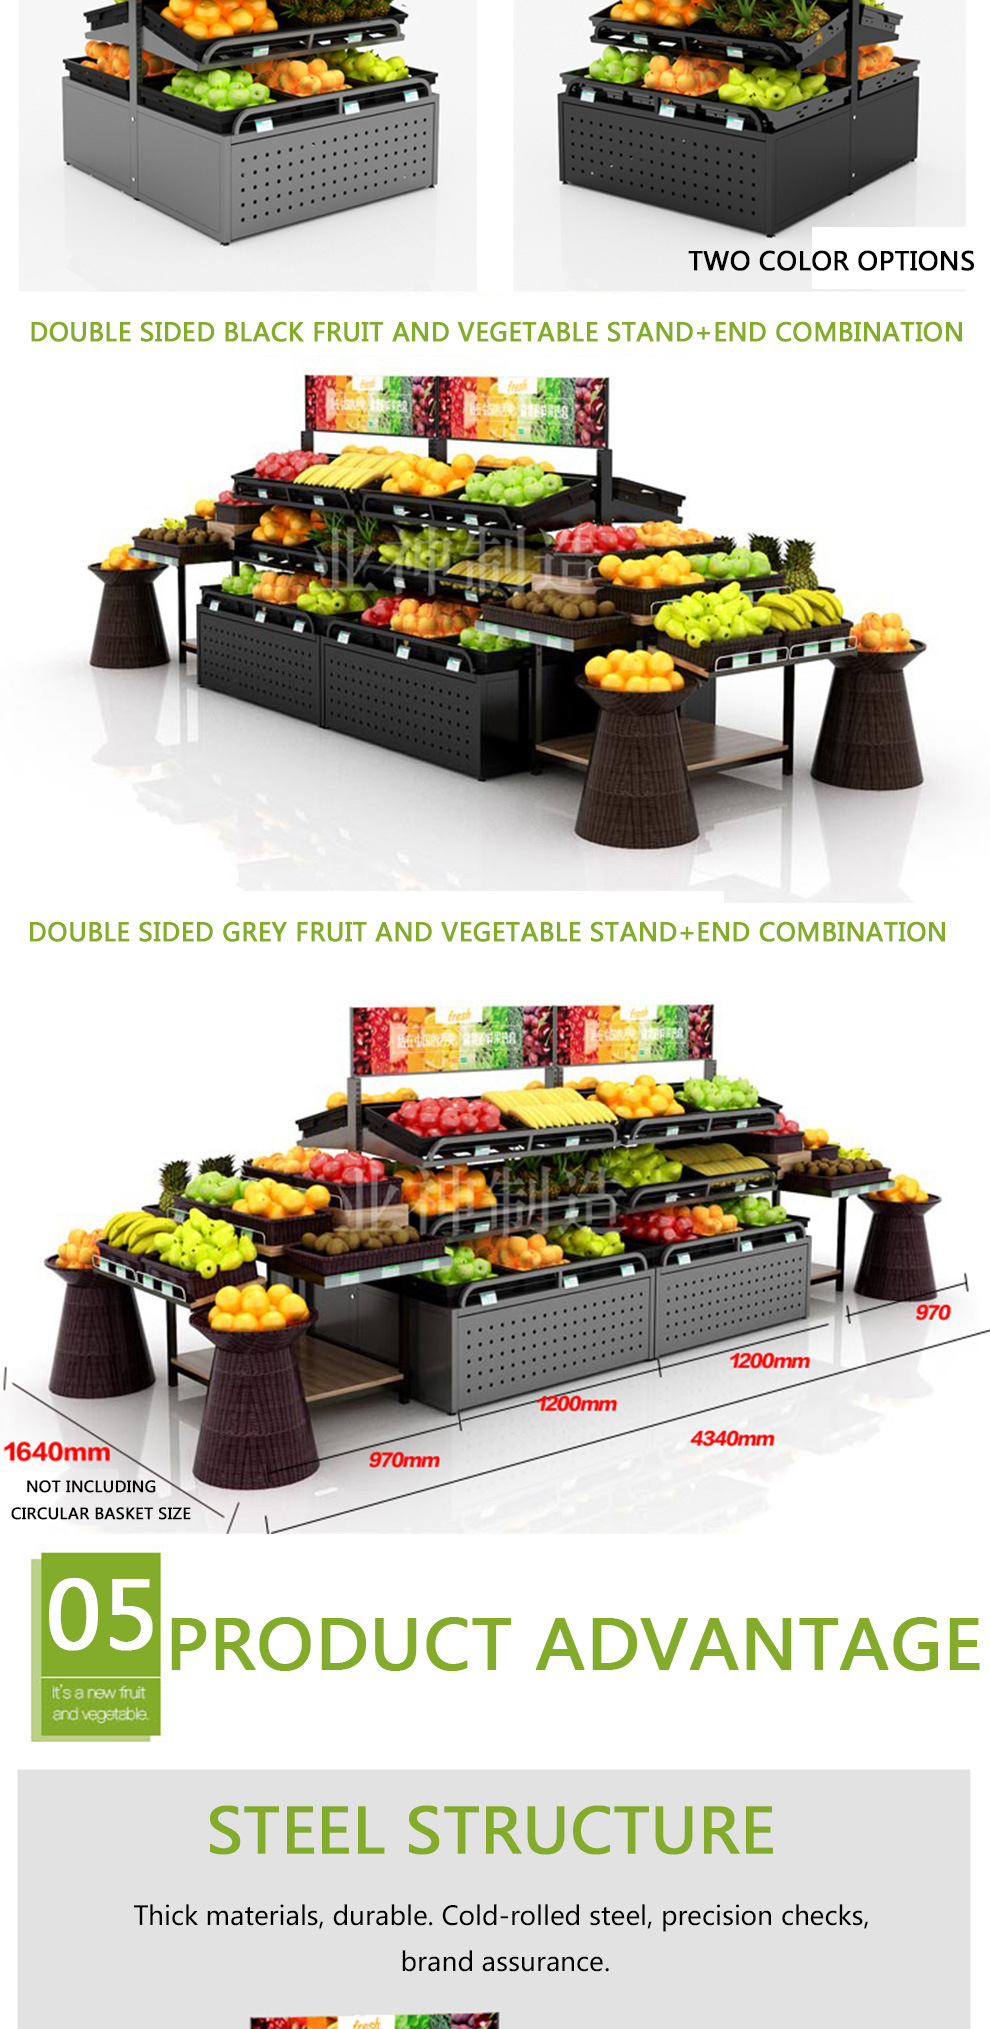 China Supplier Cold Rolled Steel Fruits and Vegetable Display Rack